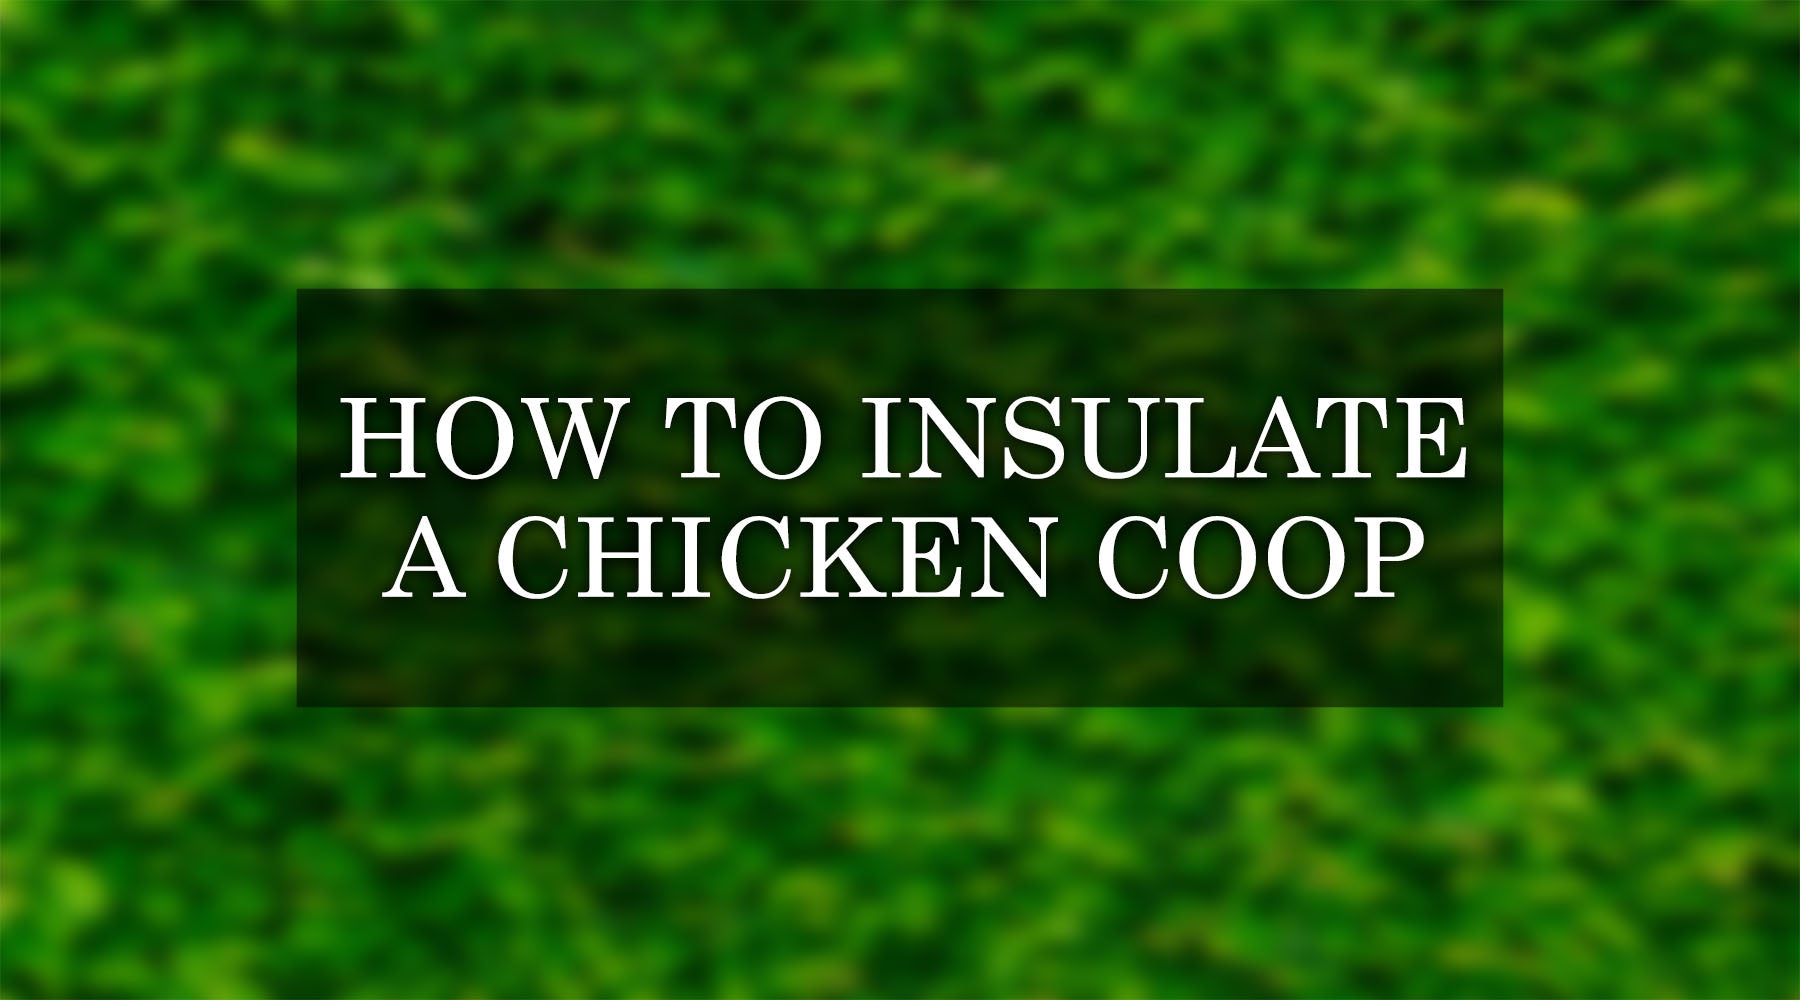 How to Insulate a Chicken Coop: Step-by-Step Guide